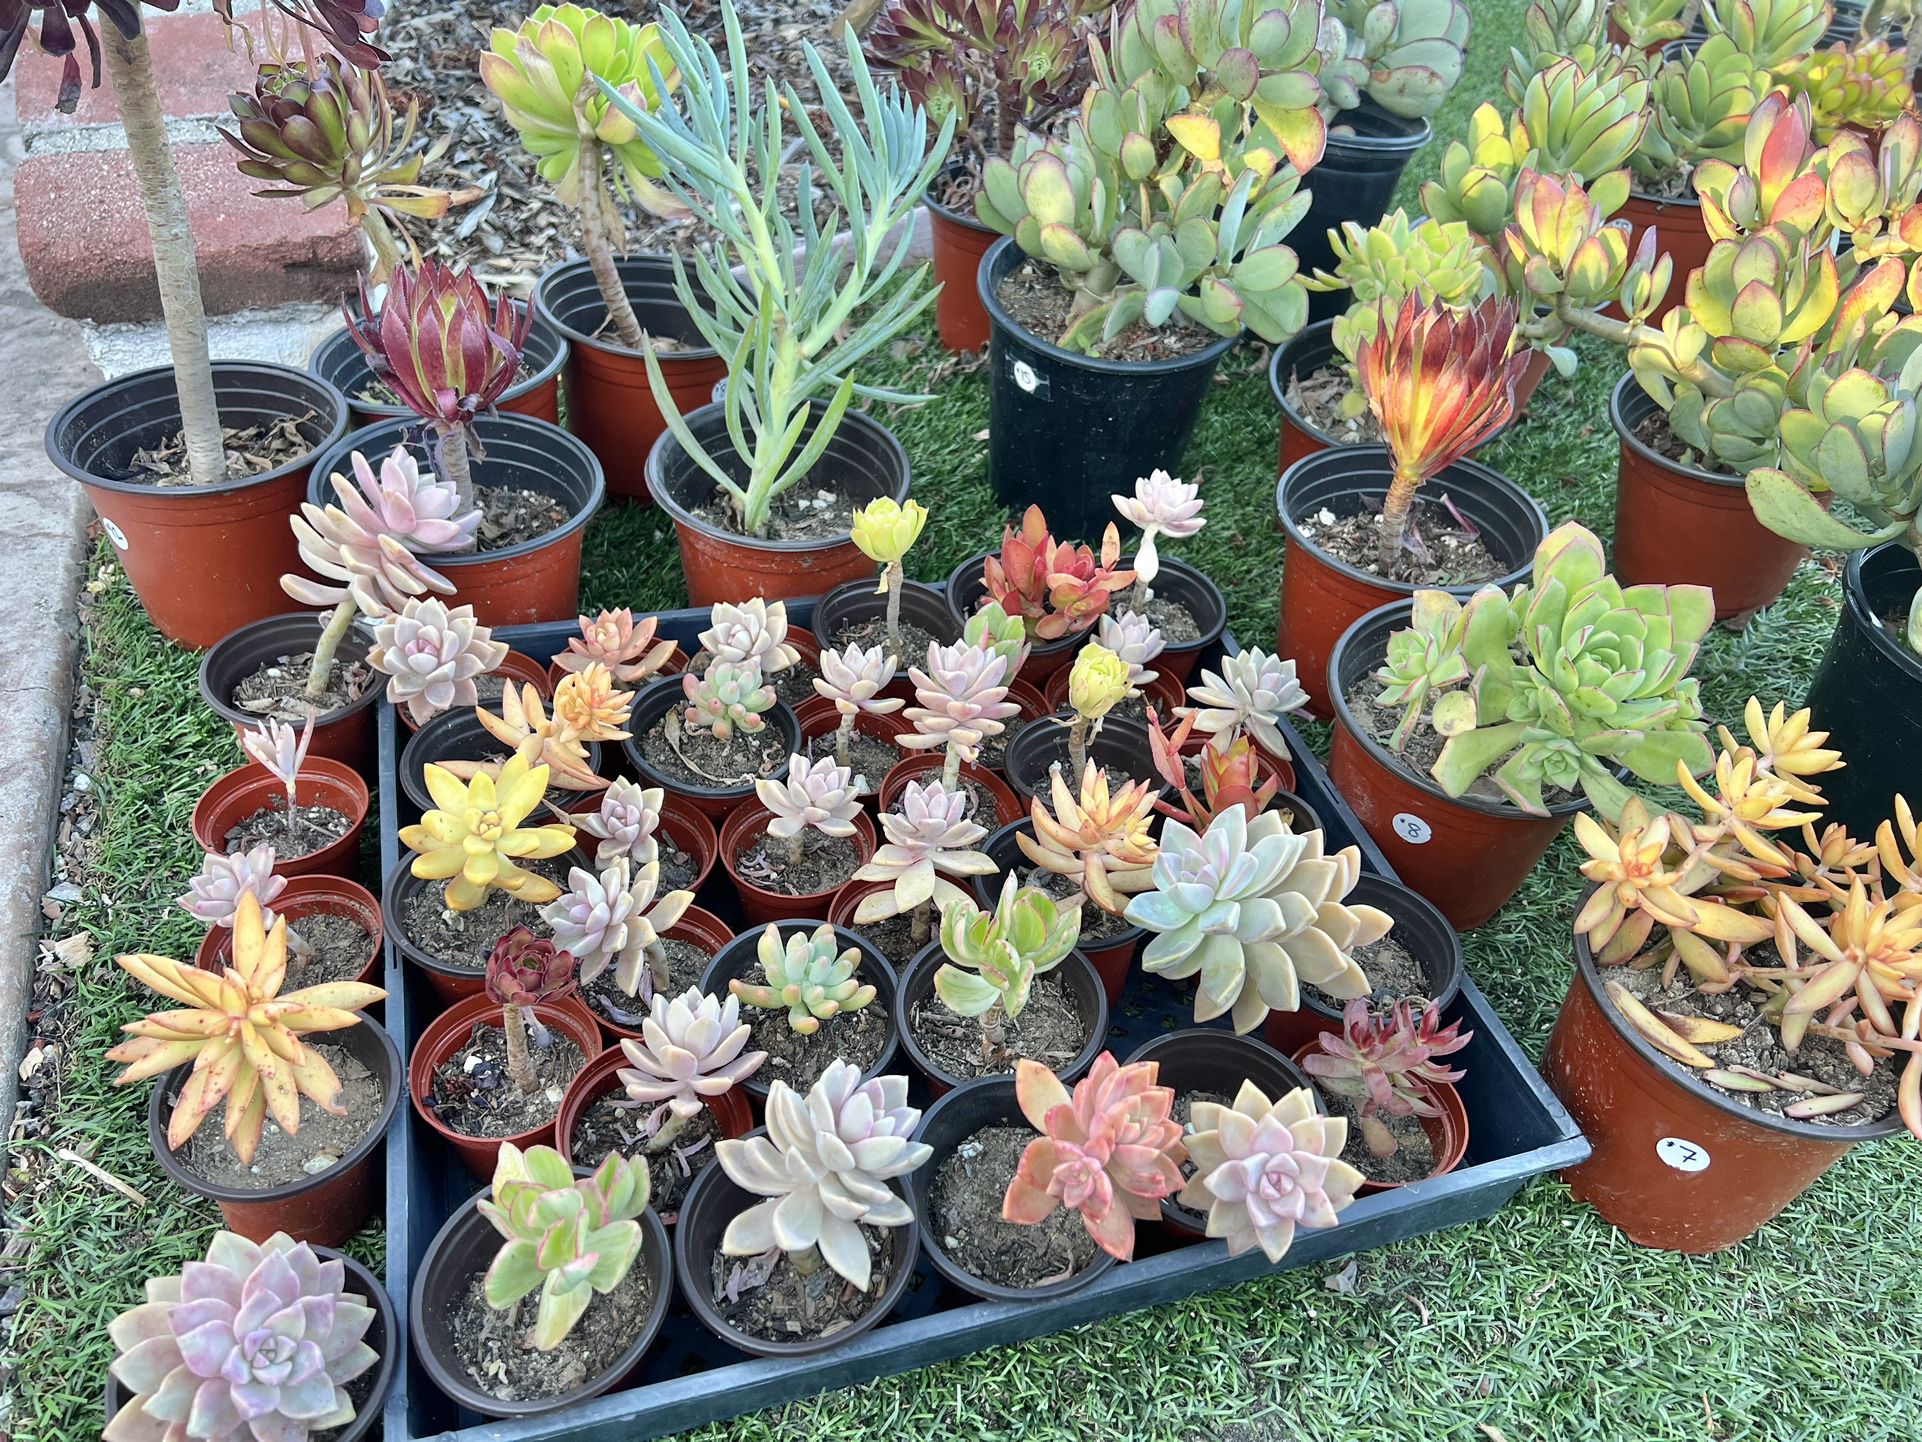 Succulents In 3inch Pots $3 